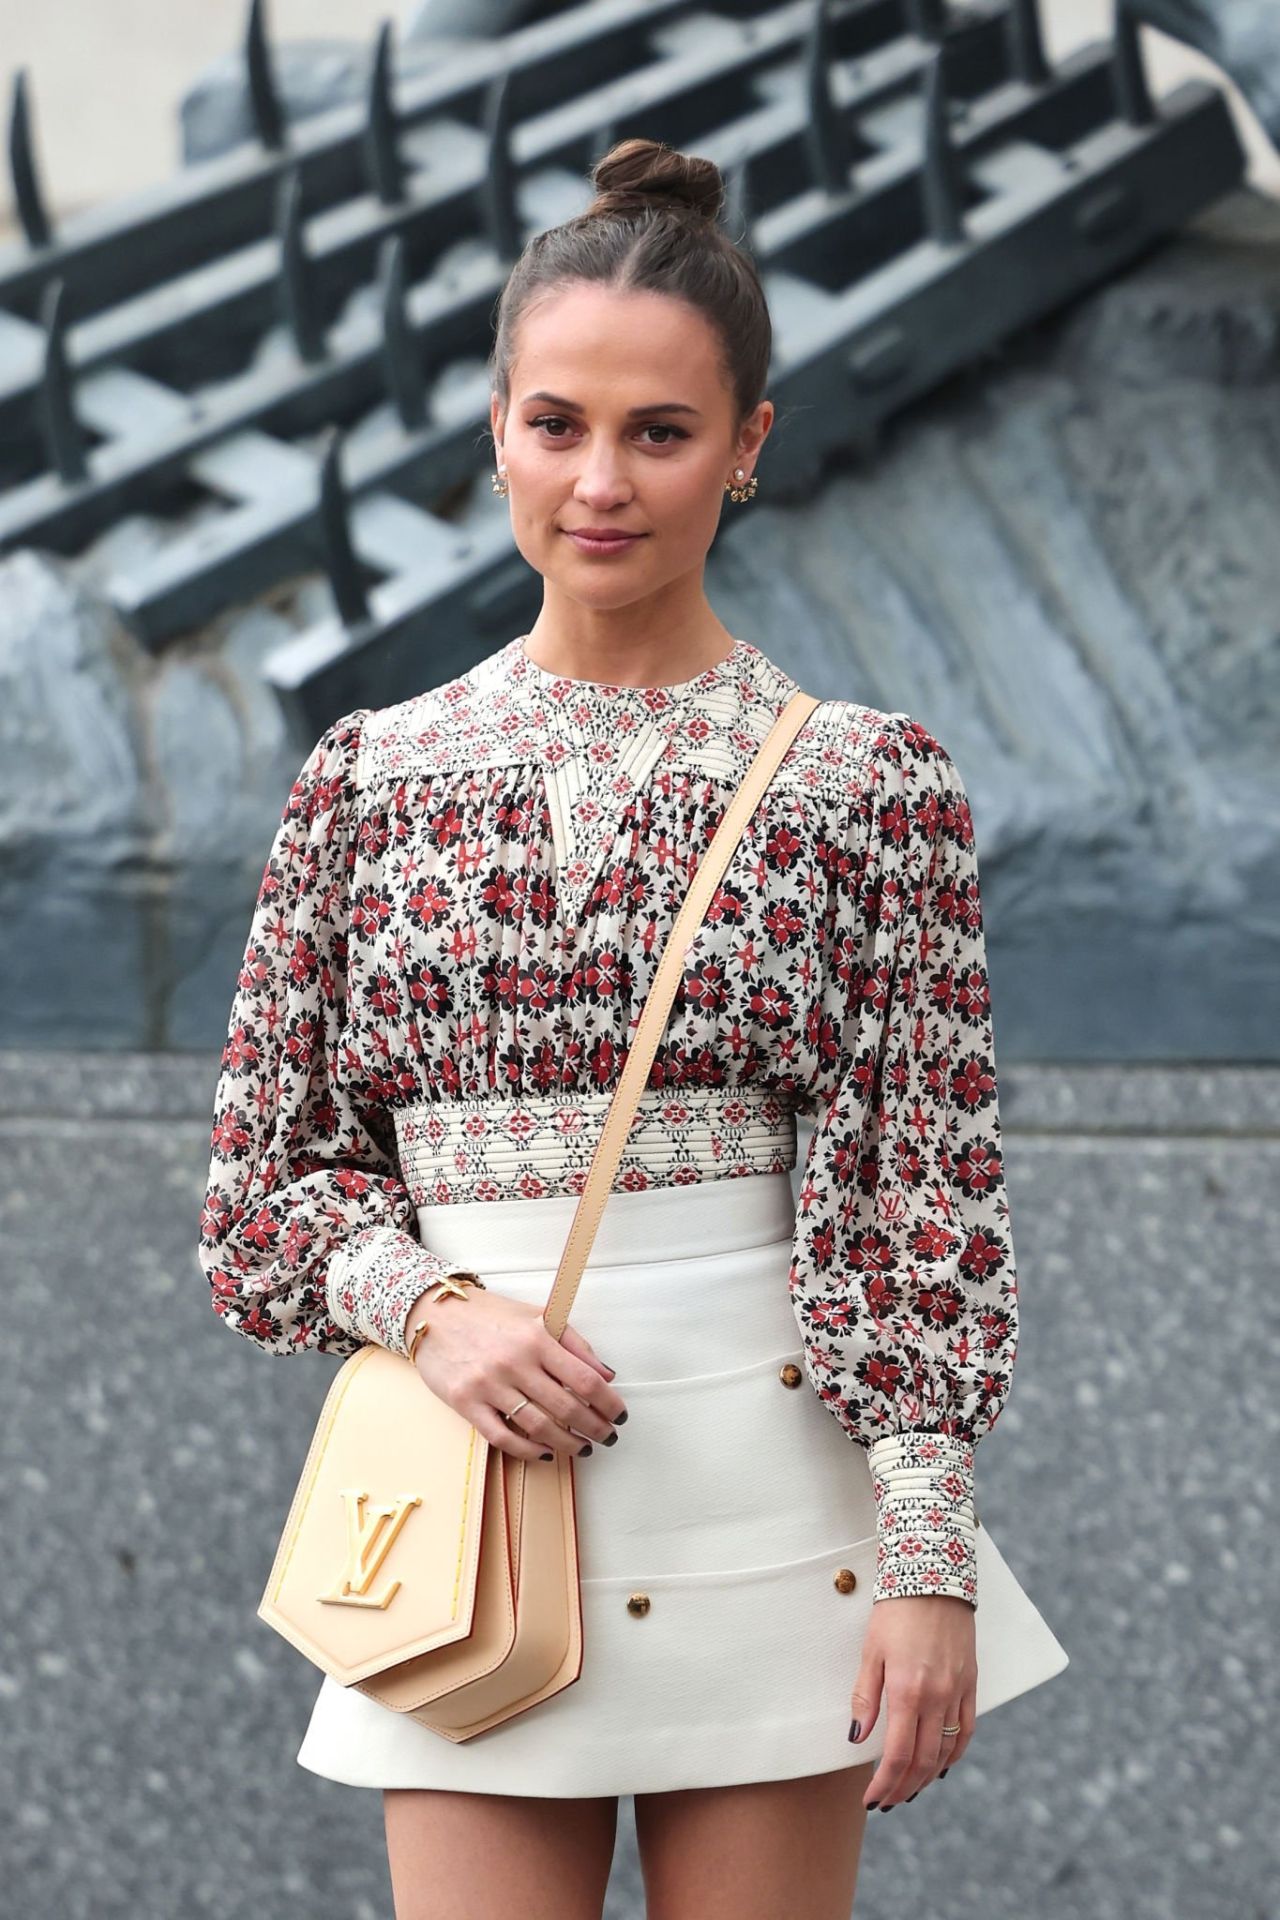 Alicia Vikander attends the Louis Vuitton SS22 show during Paris